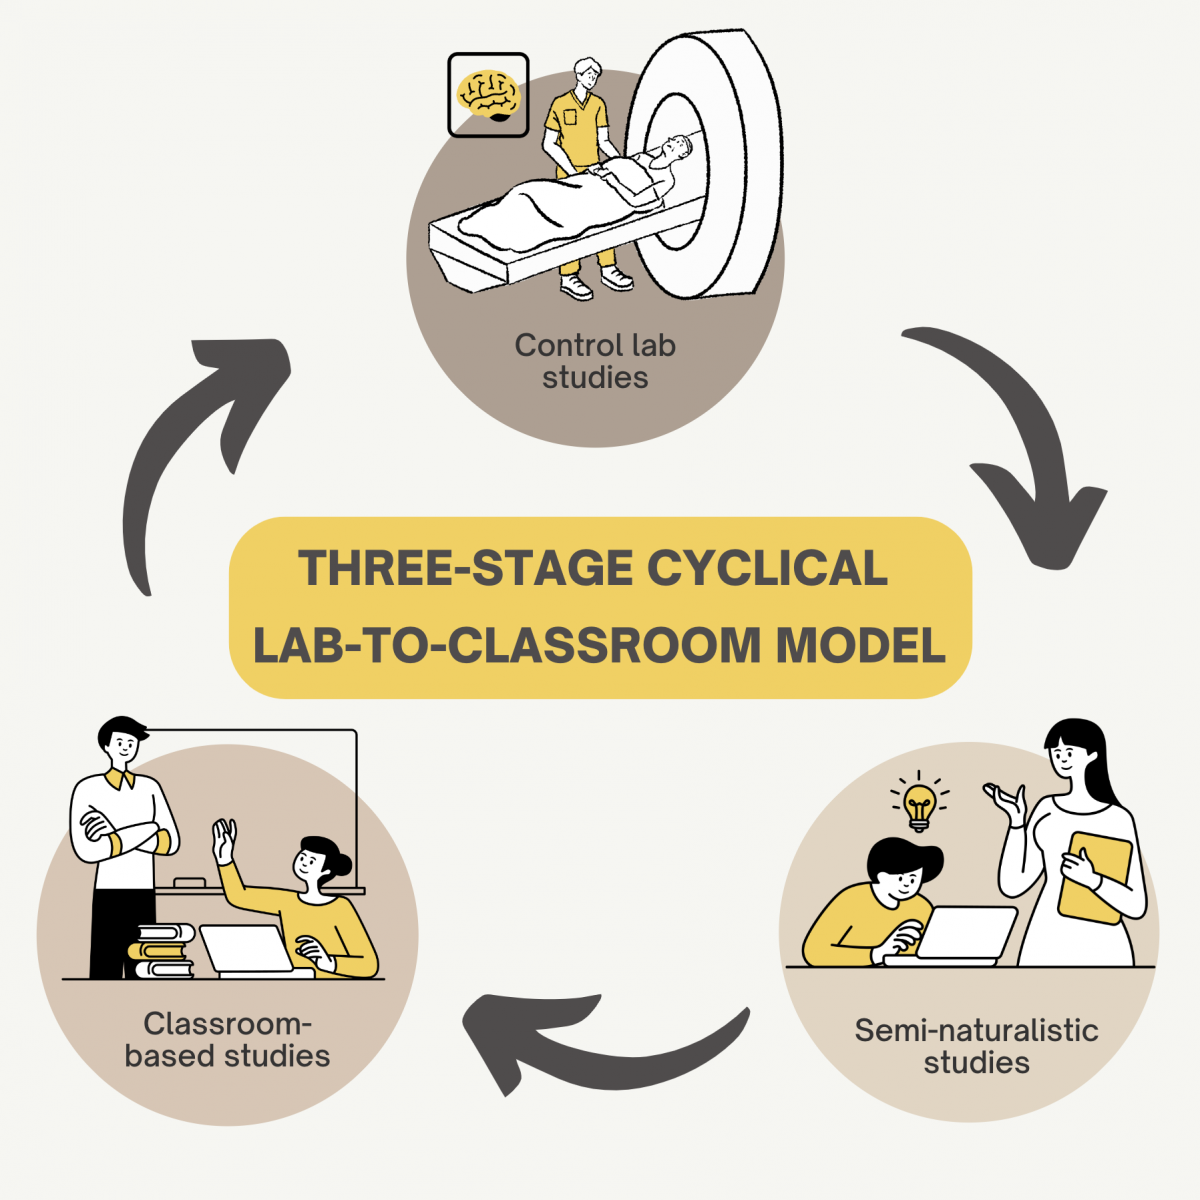 A cartoon infographic illustrating the three-stage cyclical lab-to-classroom model: (1) control lab studies, (2) classroom-based studies and (3) semi-naturalstic studies